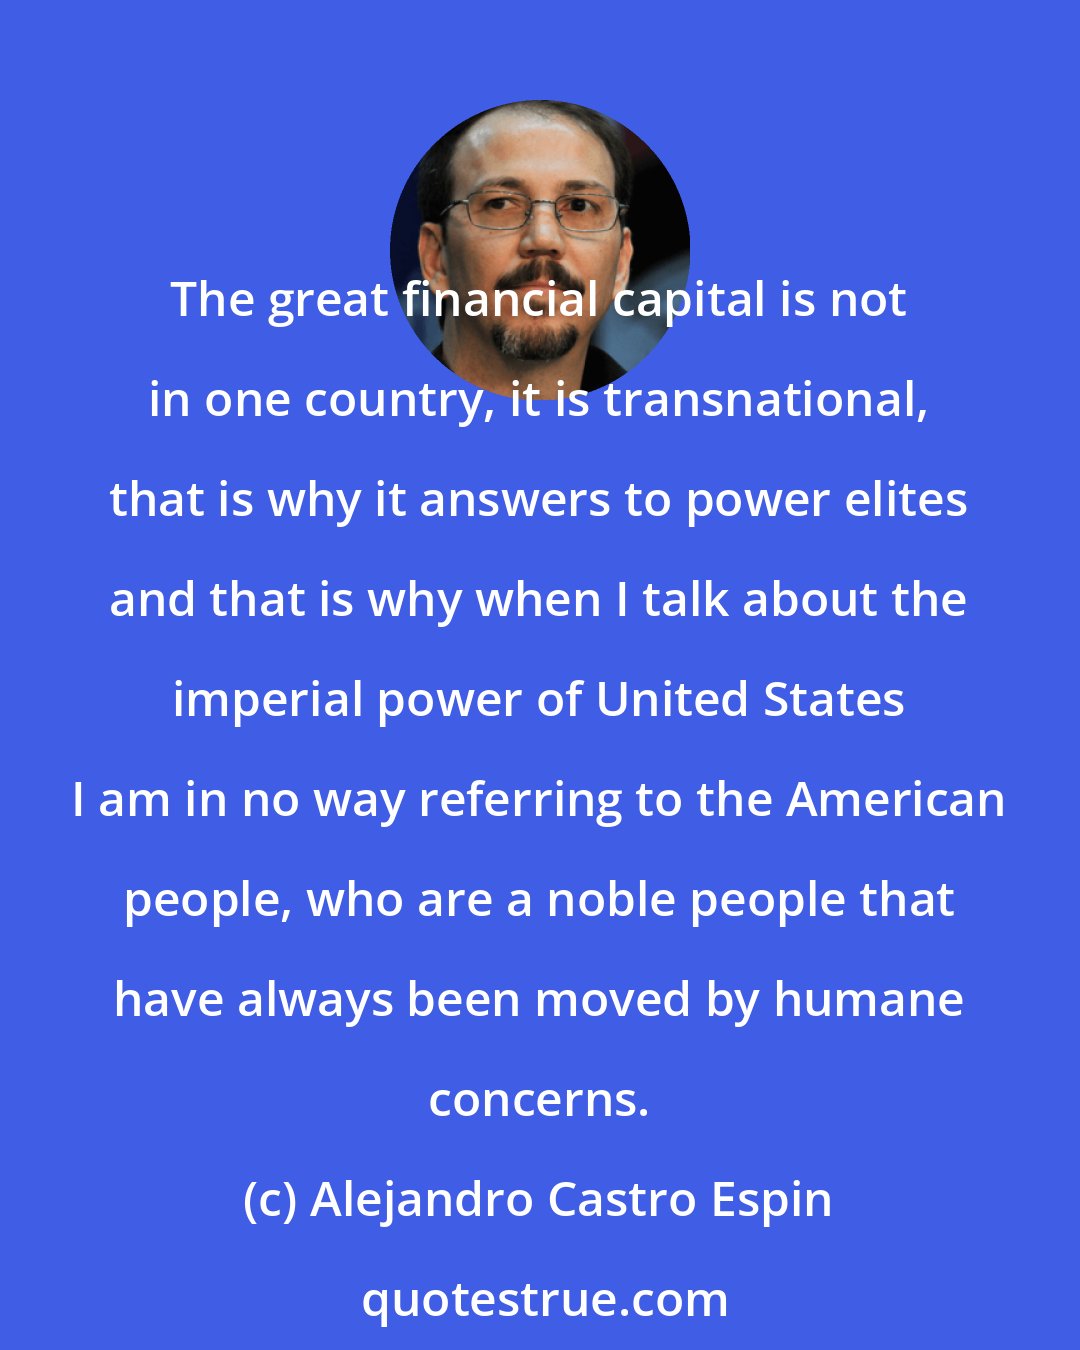 Alejandro Castro Espin: The great financial capital is not in one country, it is transnational, that is why it answers to power elites and that is why when I talk about the imperial power of United States I am in no way referring to the American people, who are a noble people that have always been moved by humane concerns.